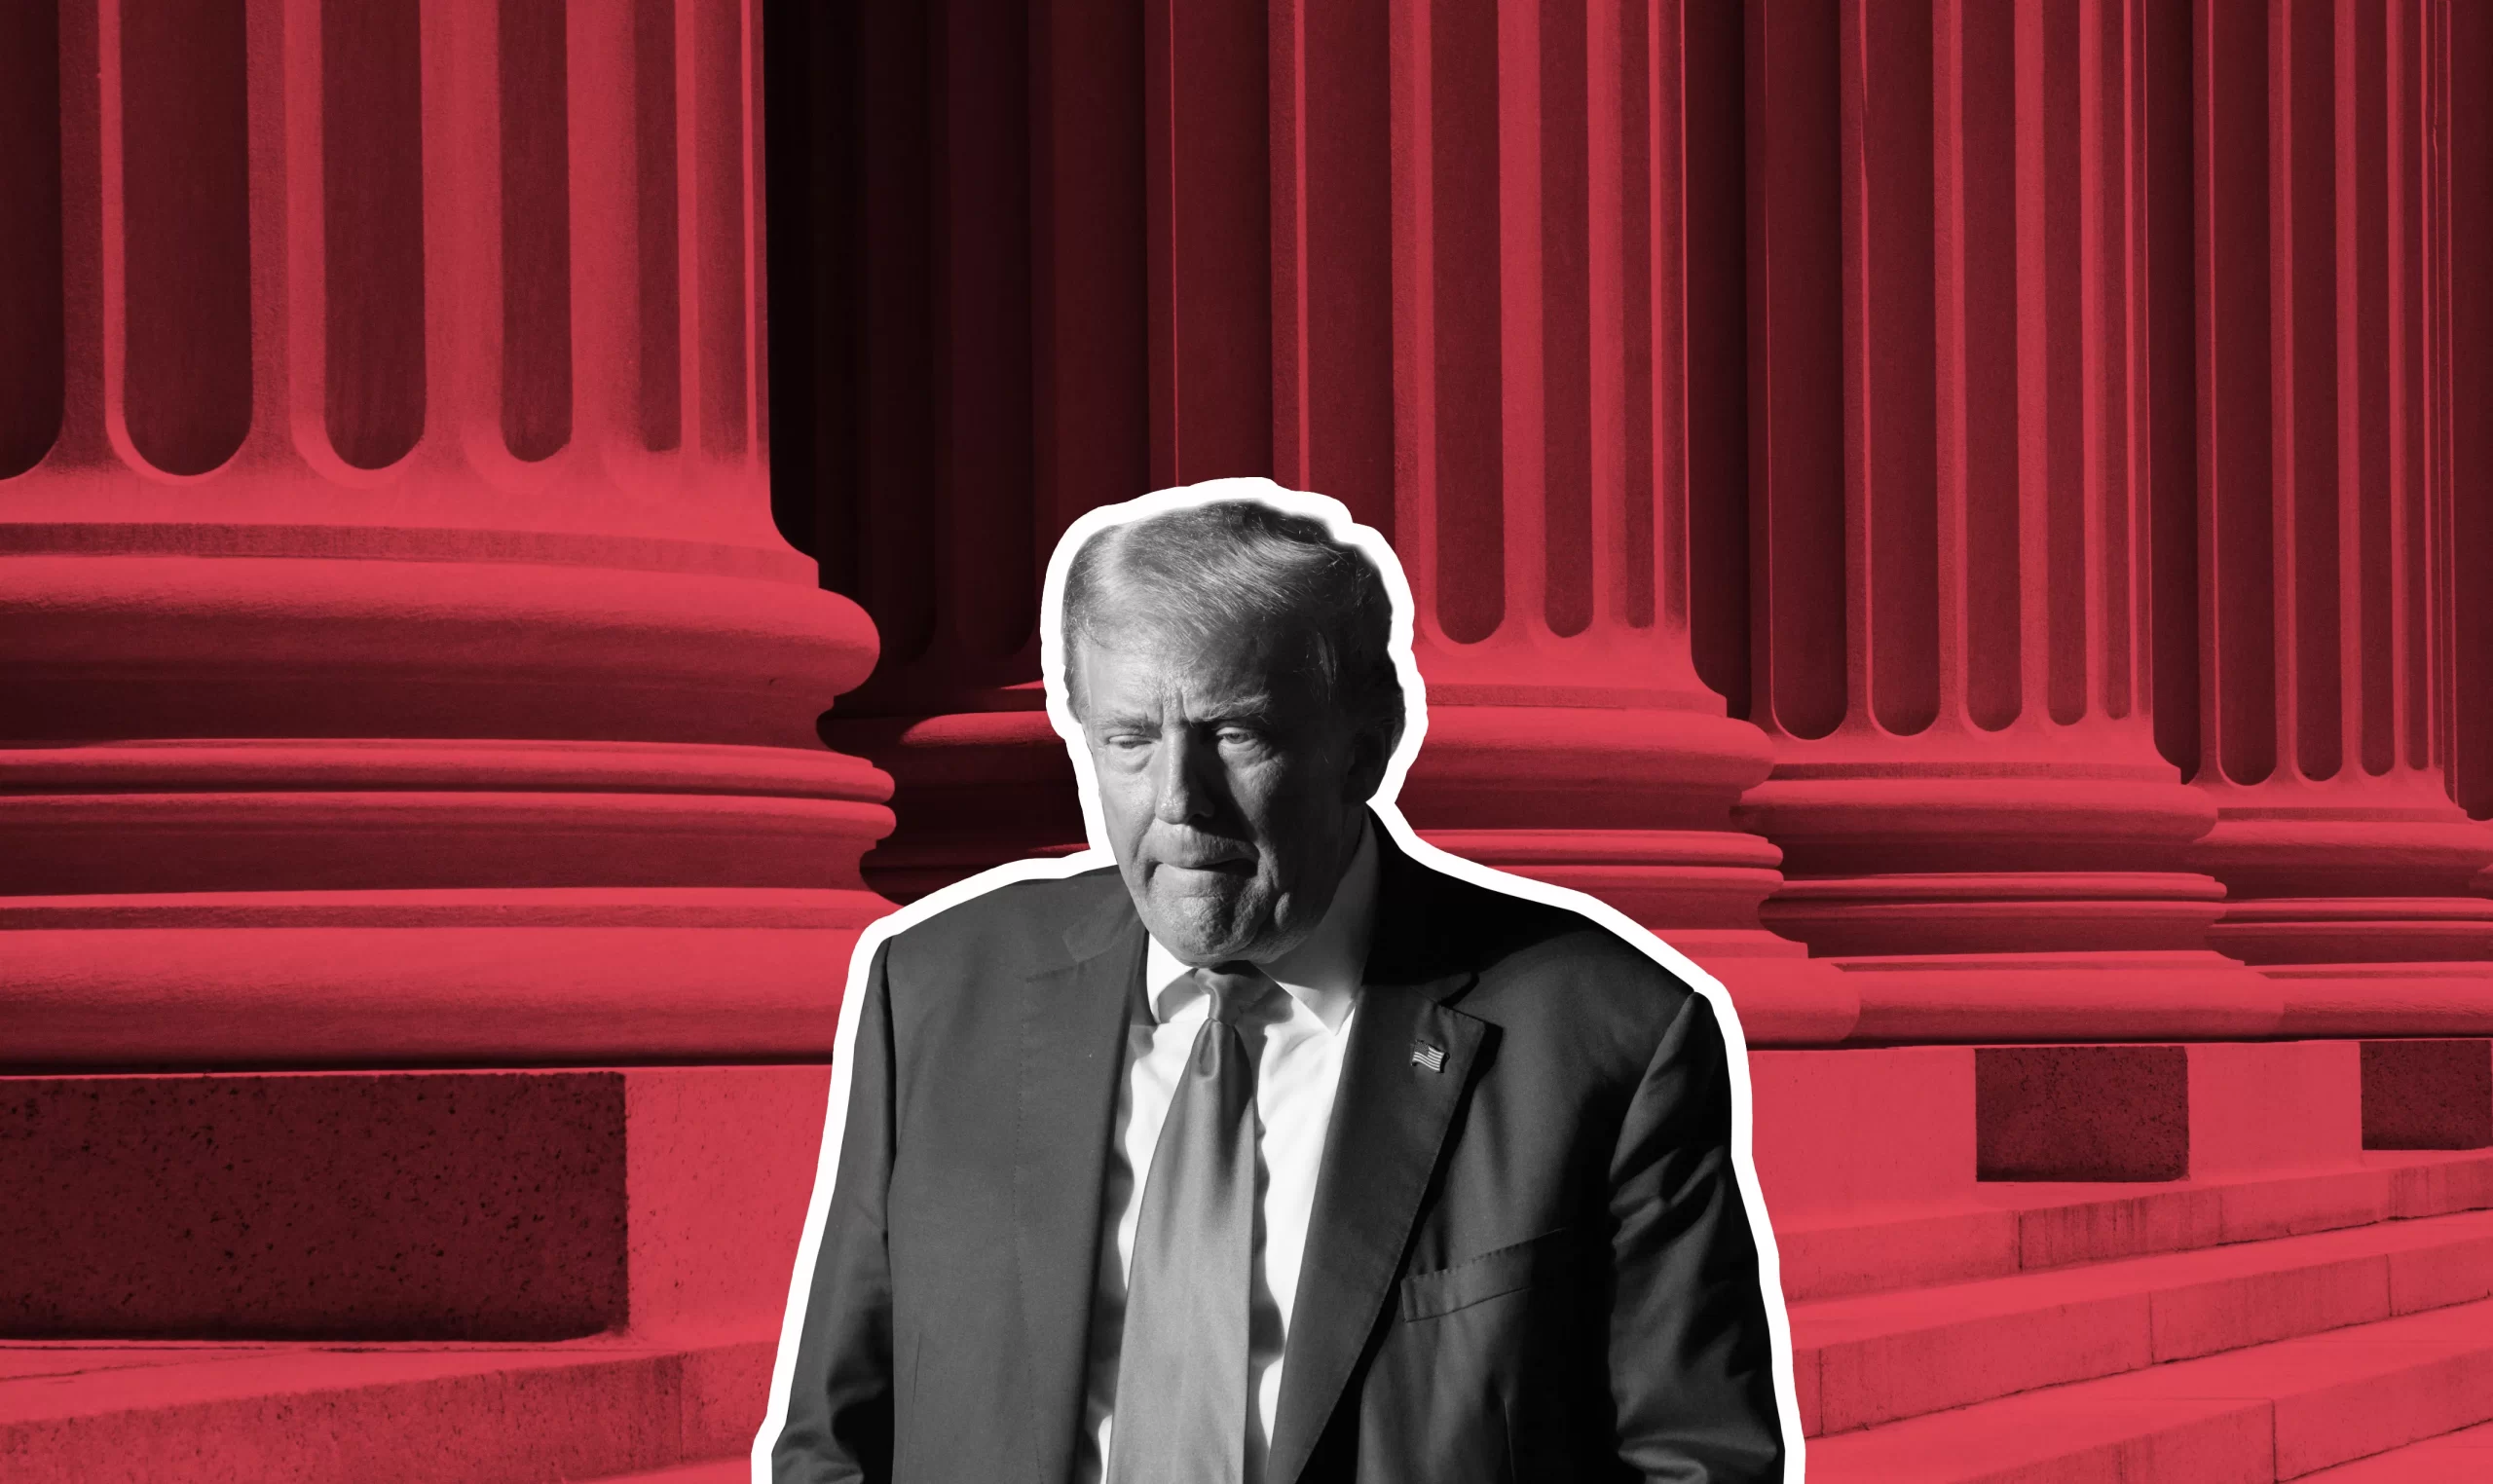 Trump’s Legal Battles: An In-Depth Look at His Four Major Indictments